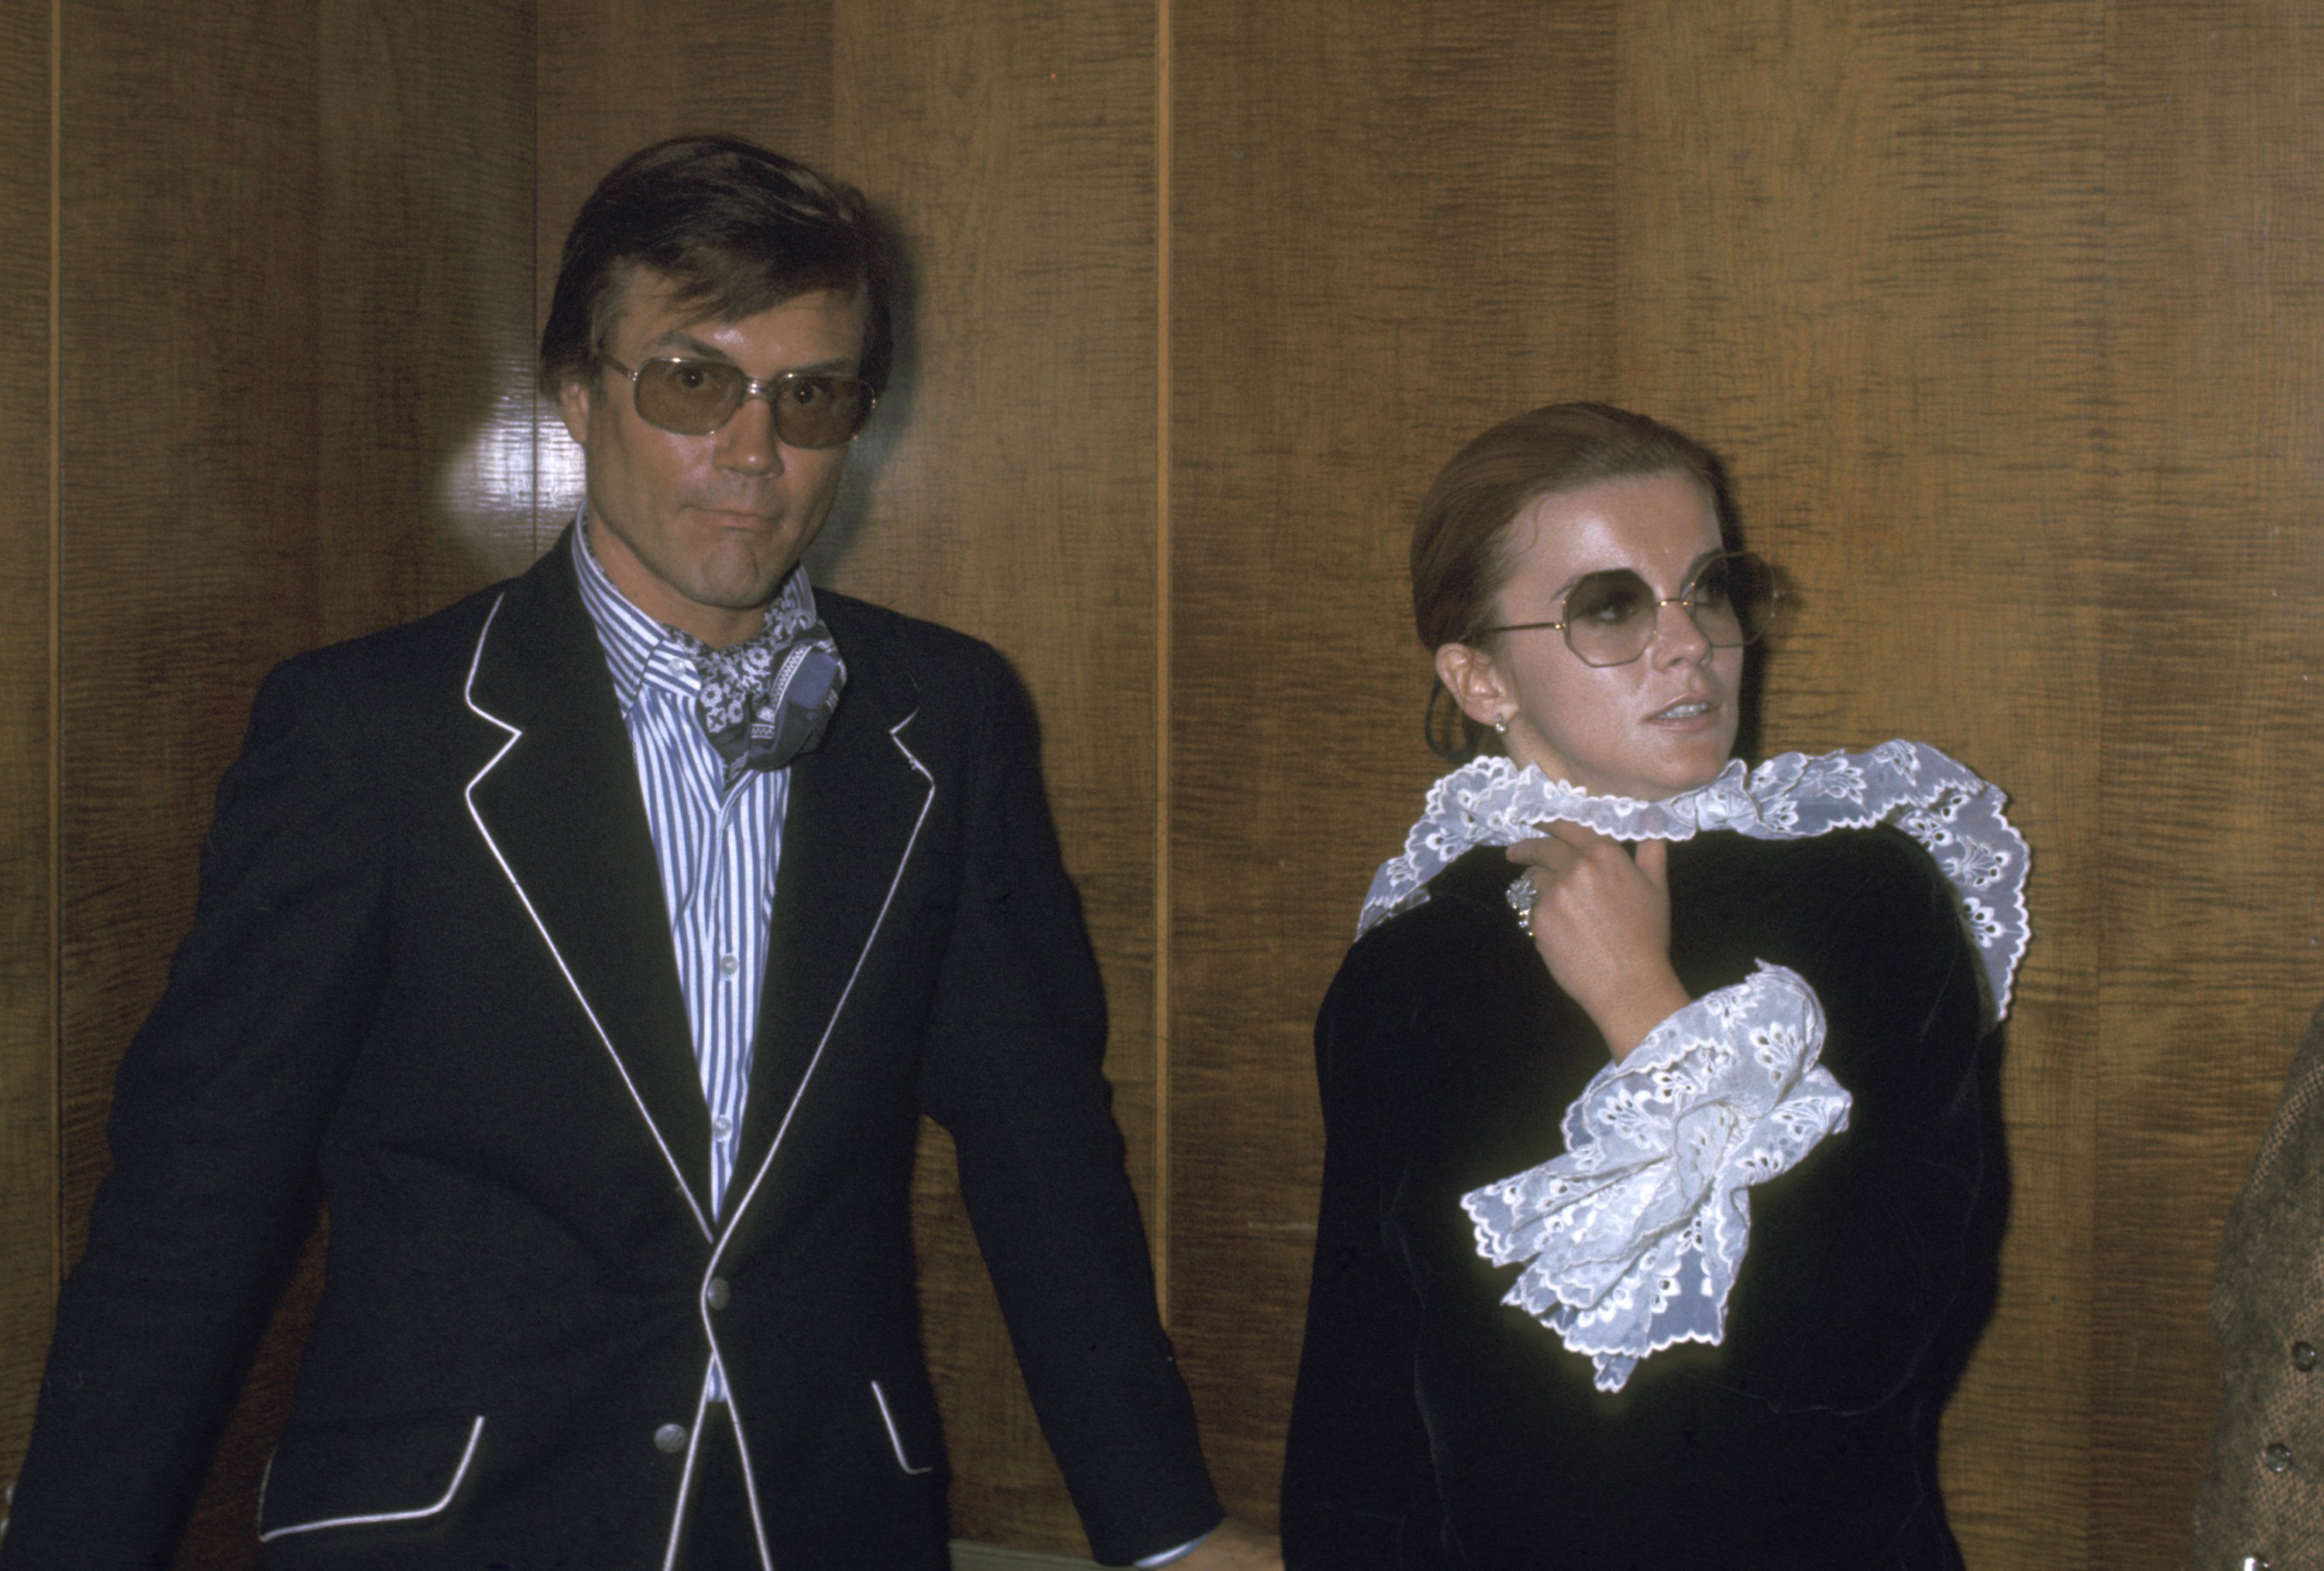 Ann-Margret and her husband of fifty years, Roger Smith, during their visit in New York City, New York. / Source: Getty Images